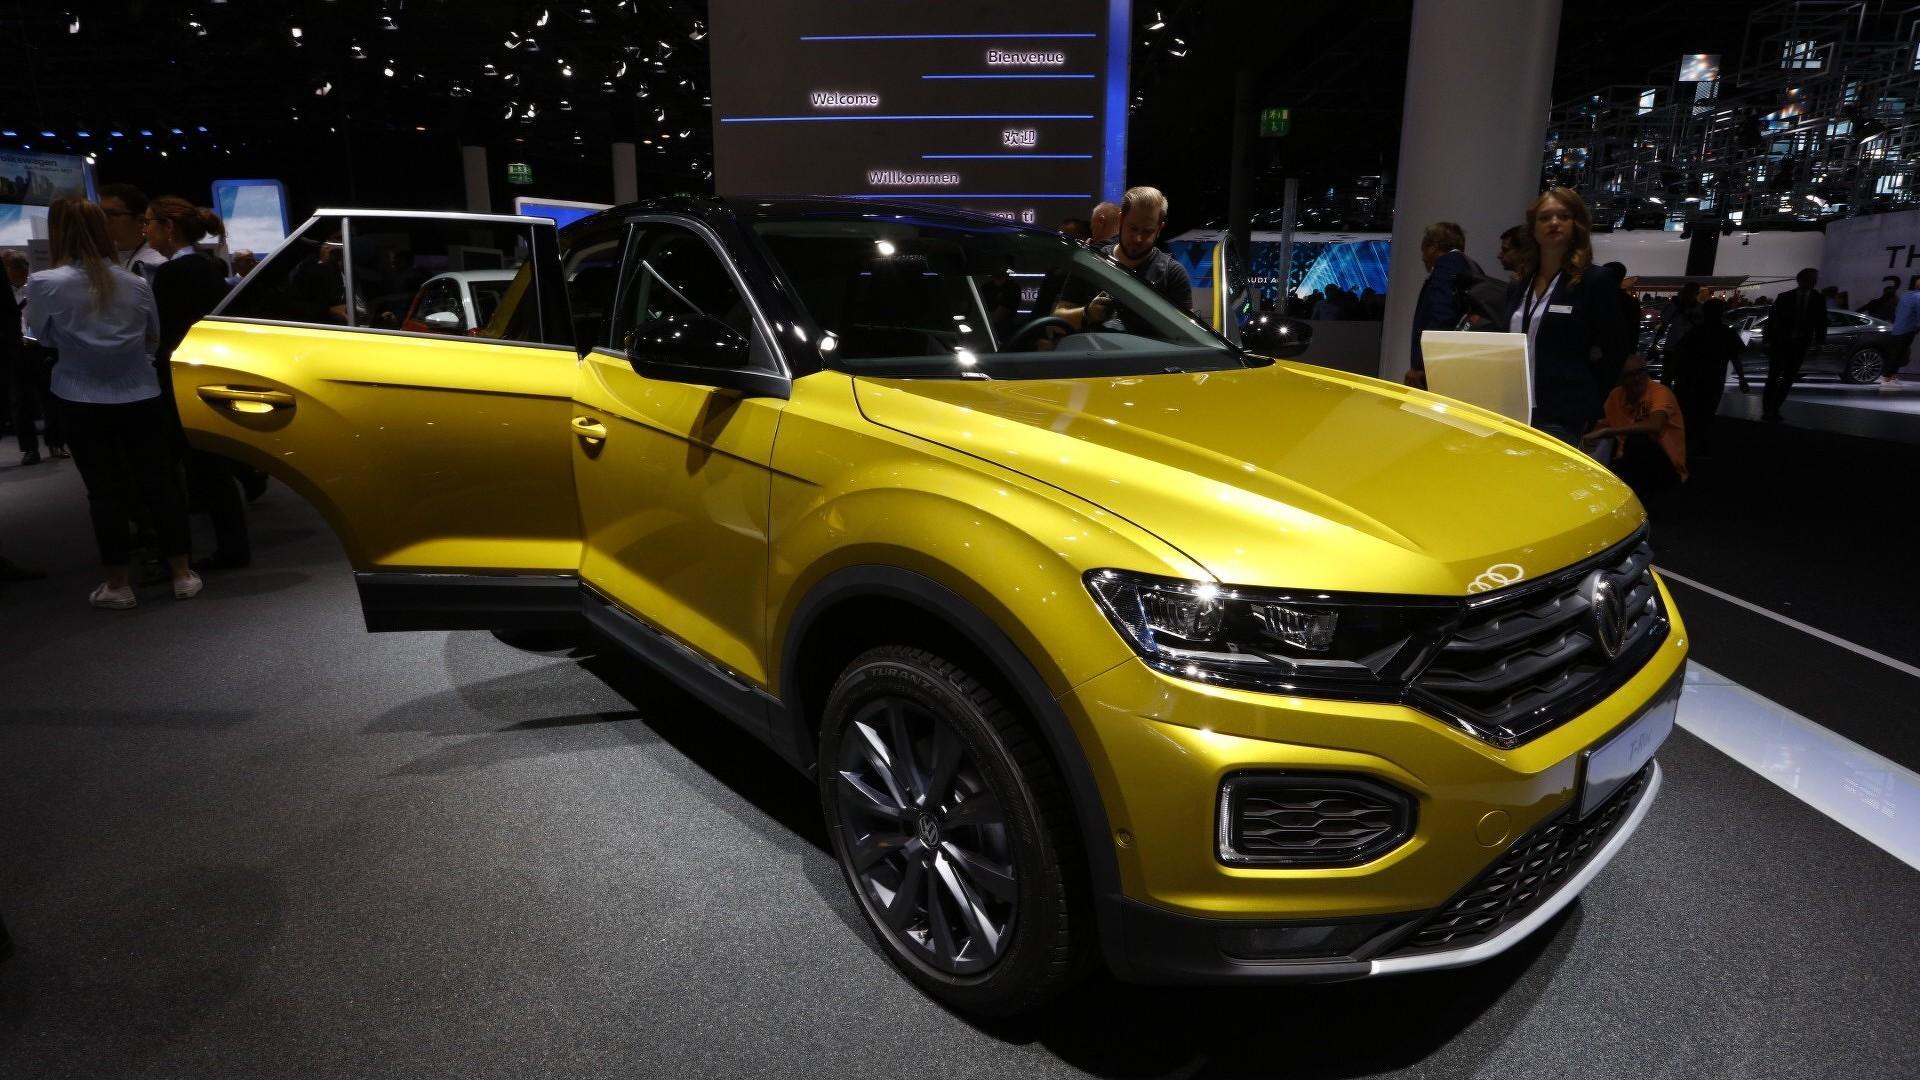 VW T Roc Gets Sporty In Frankfurt With R Line Debut